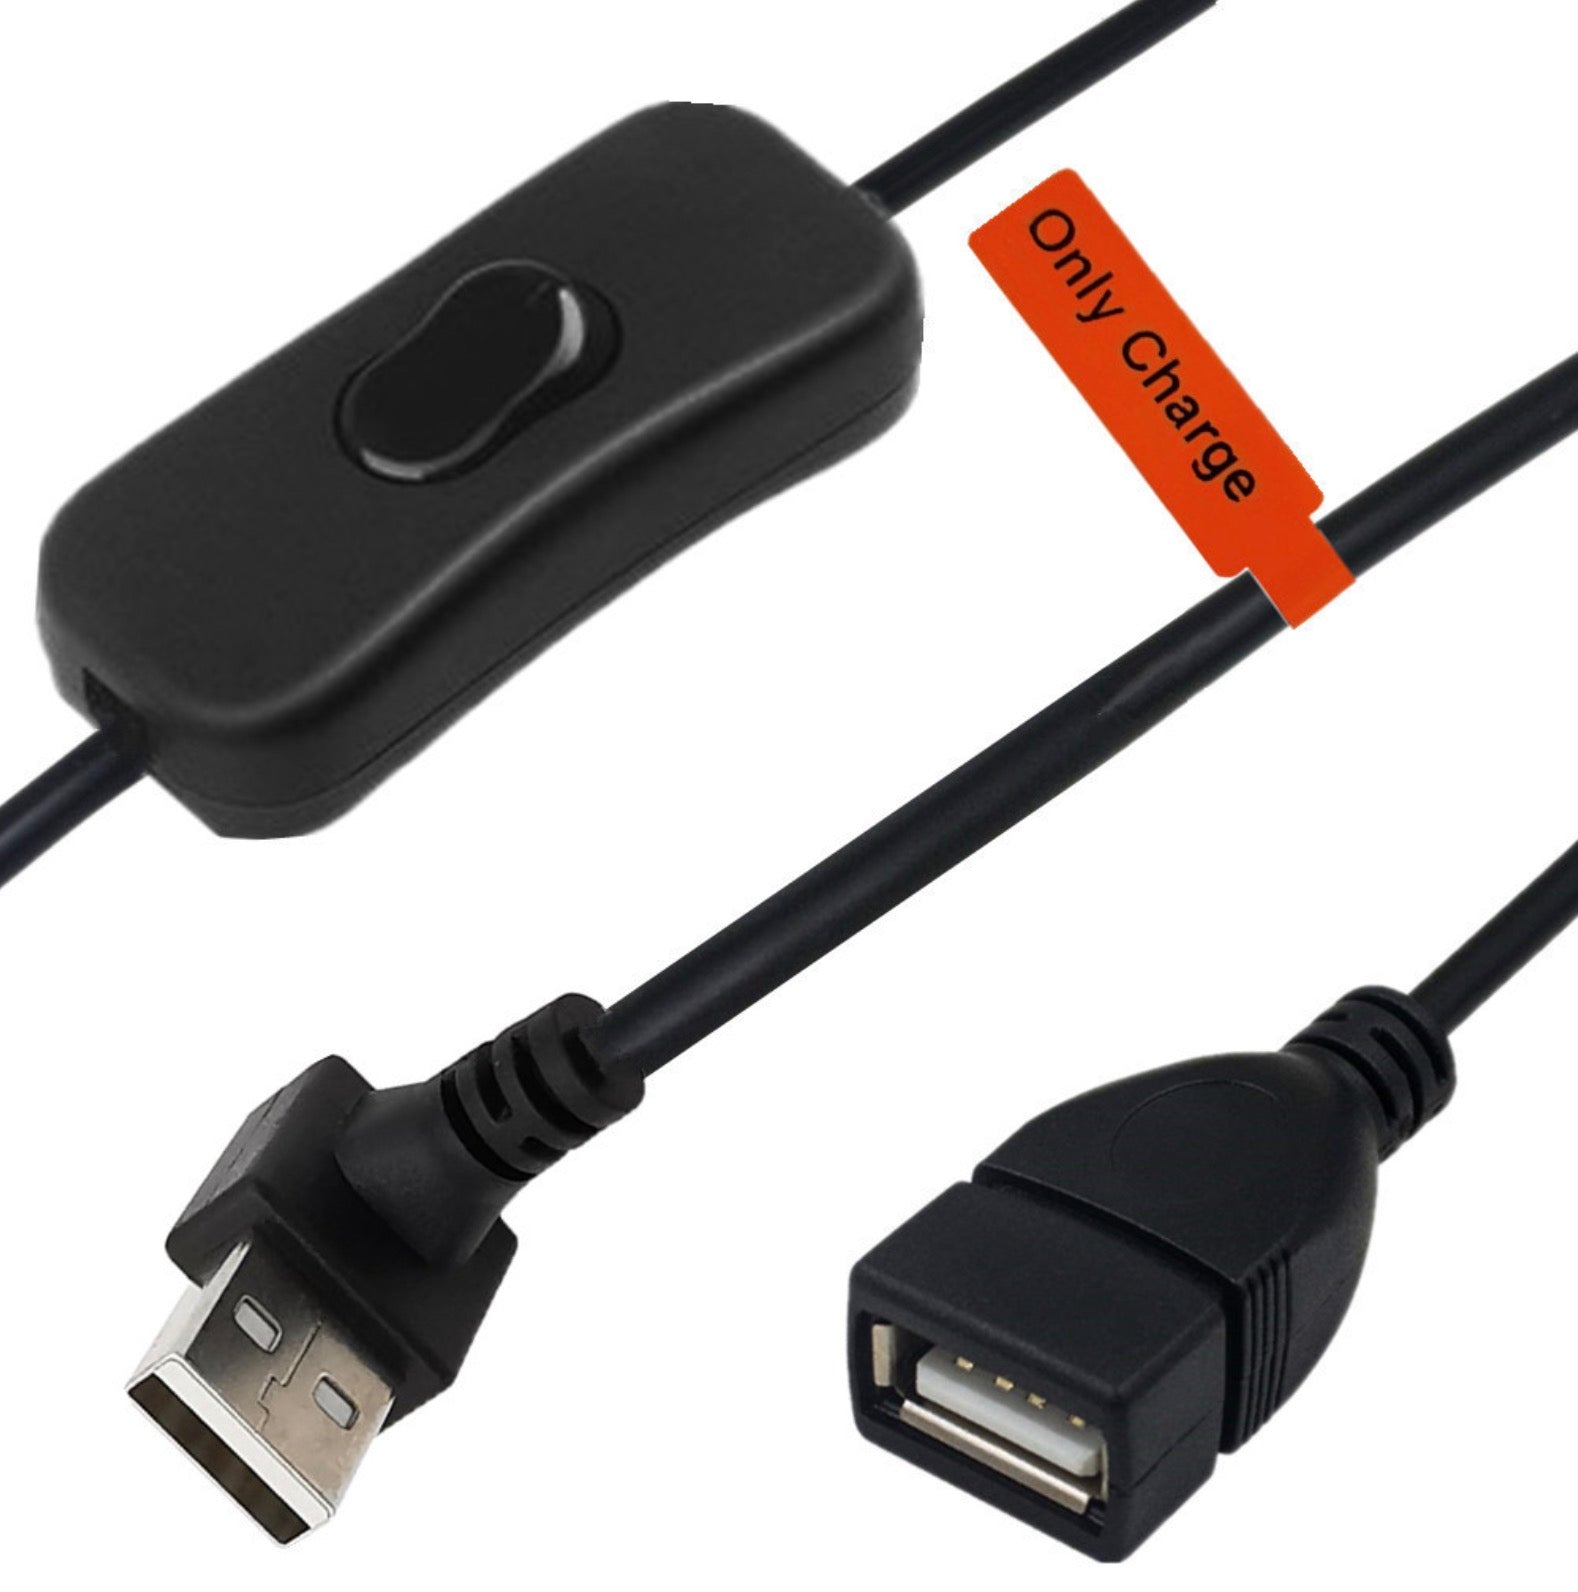 USB 2.0 A Male to Female 3A Charging Extension Cable with On/Off Switch 0.3m